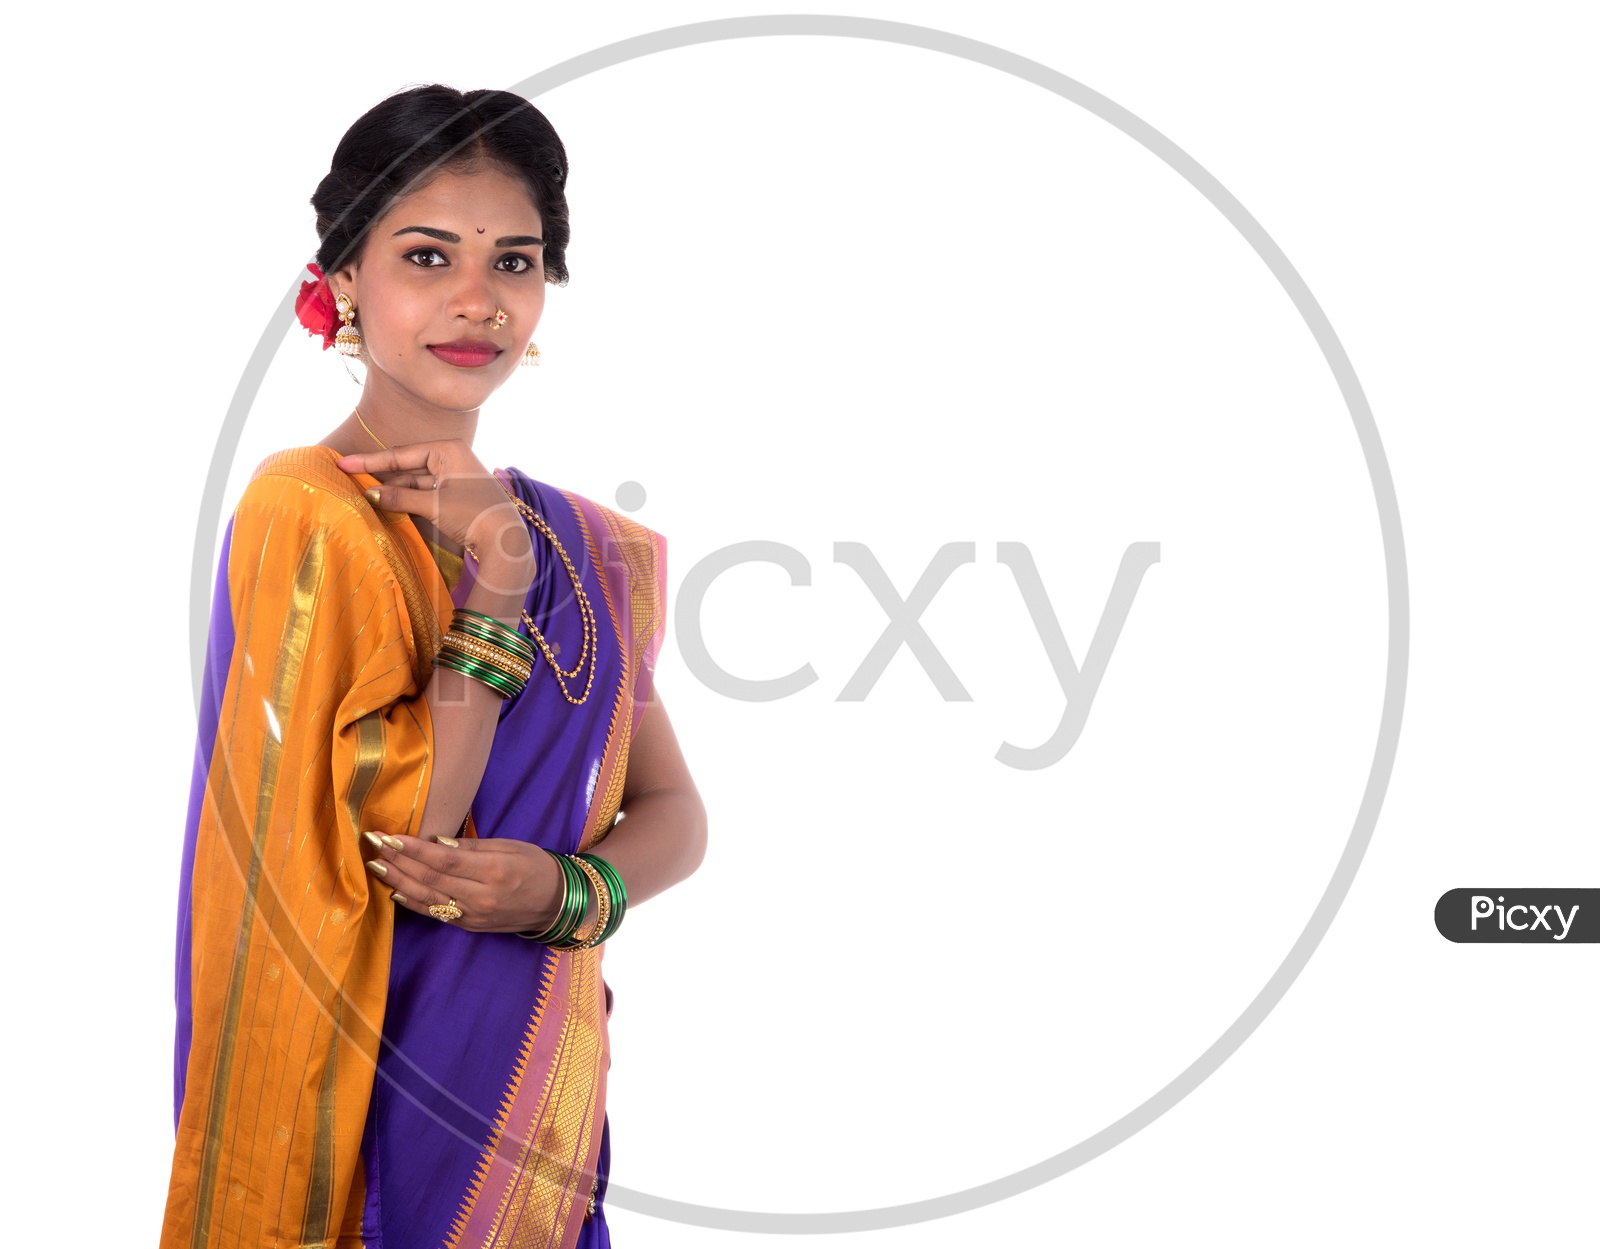 Beautiful Indian young girl posing in traditional Indian saree on white background.